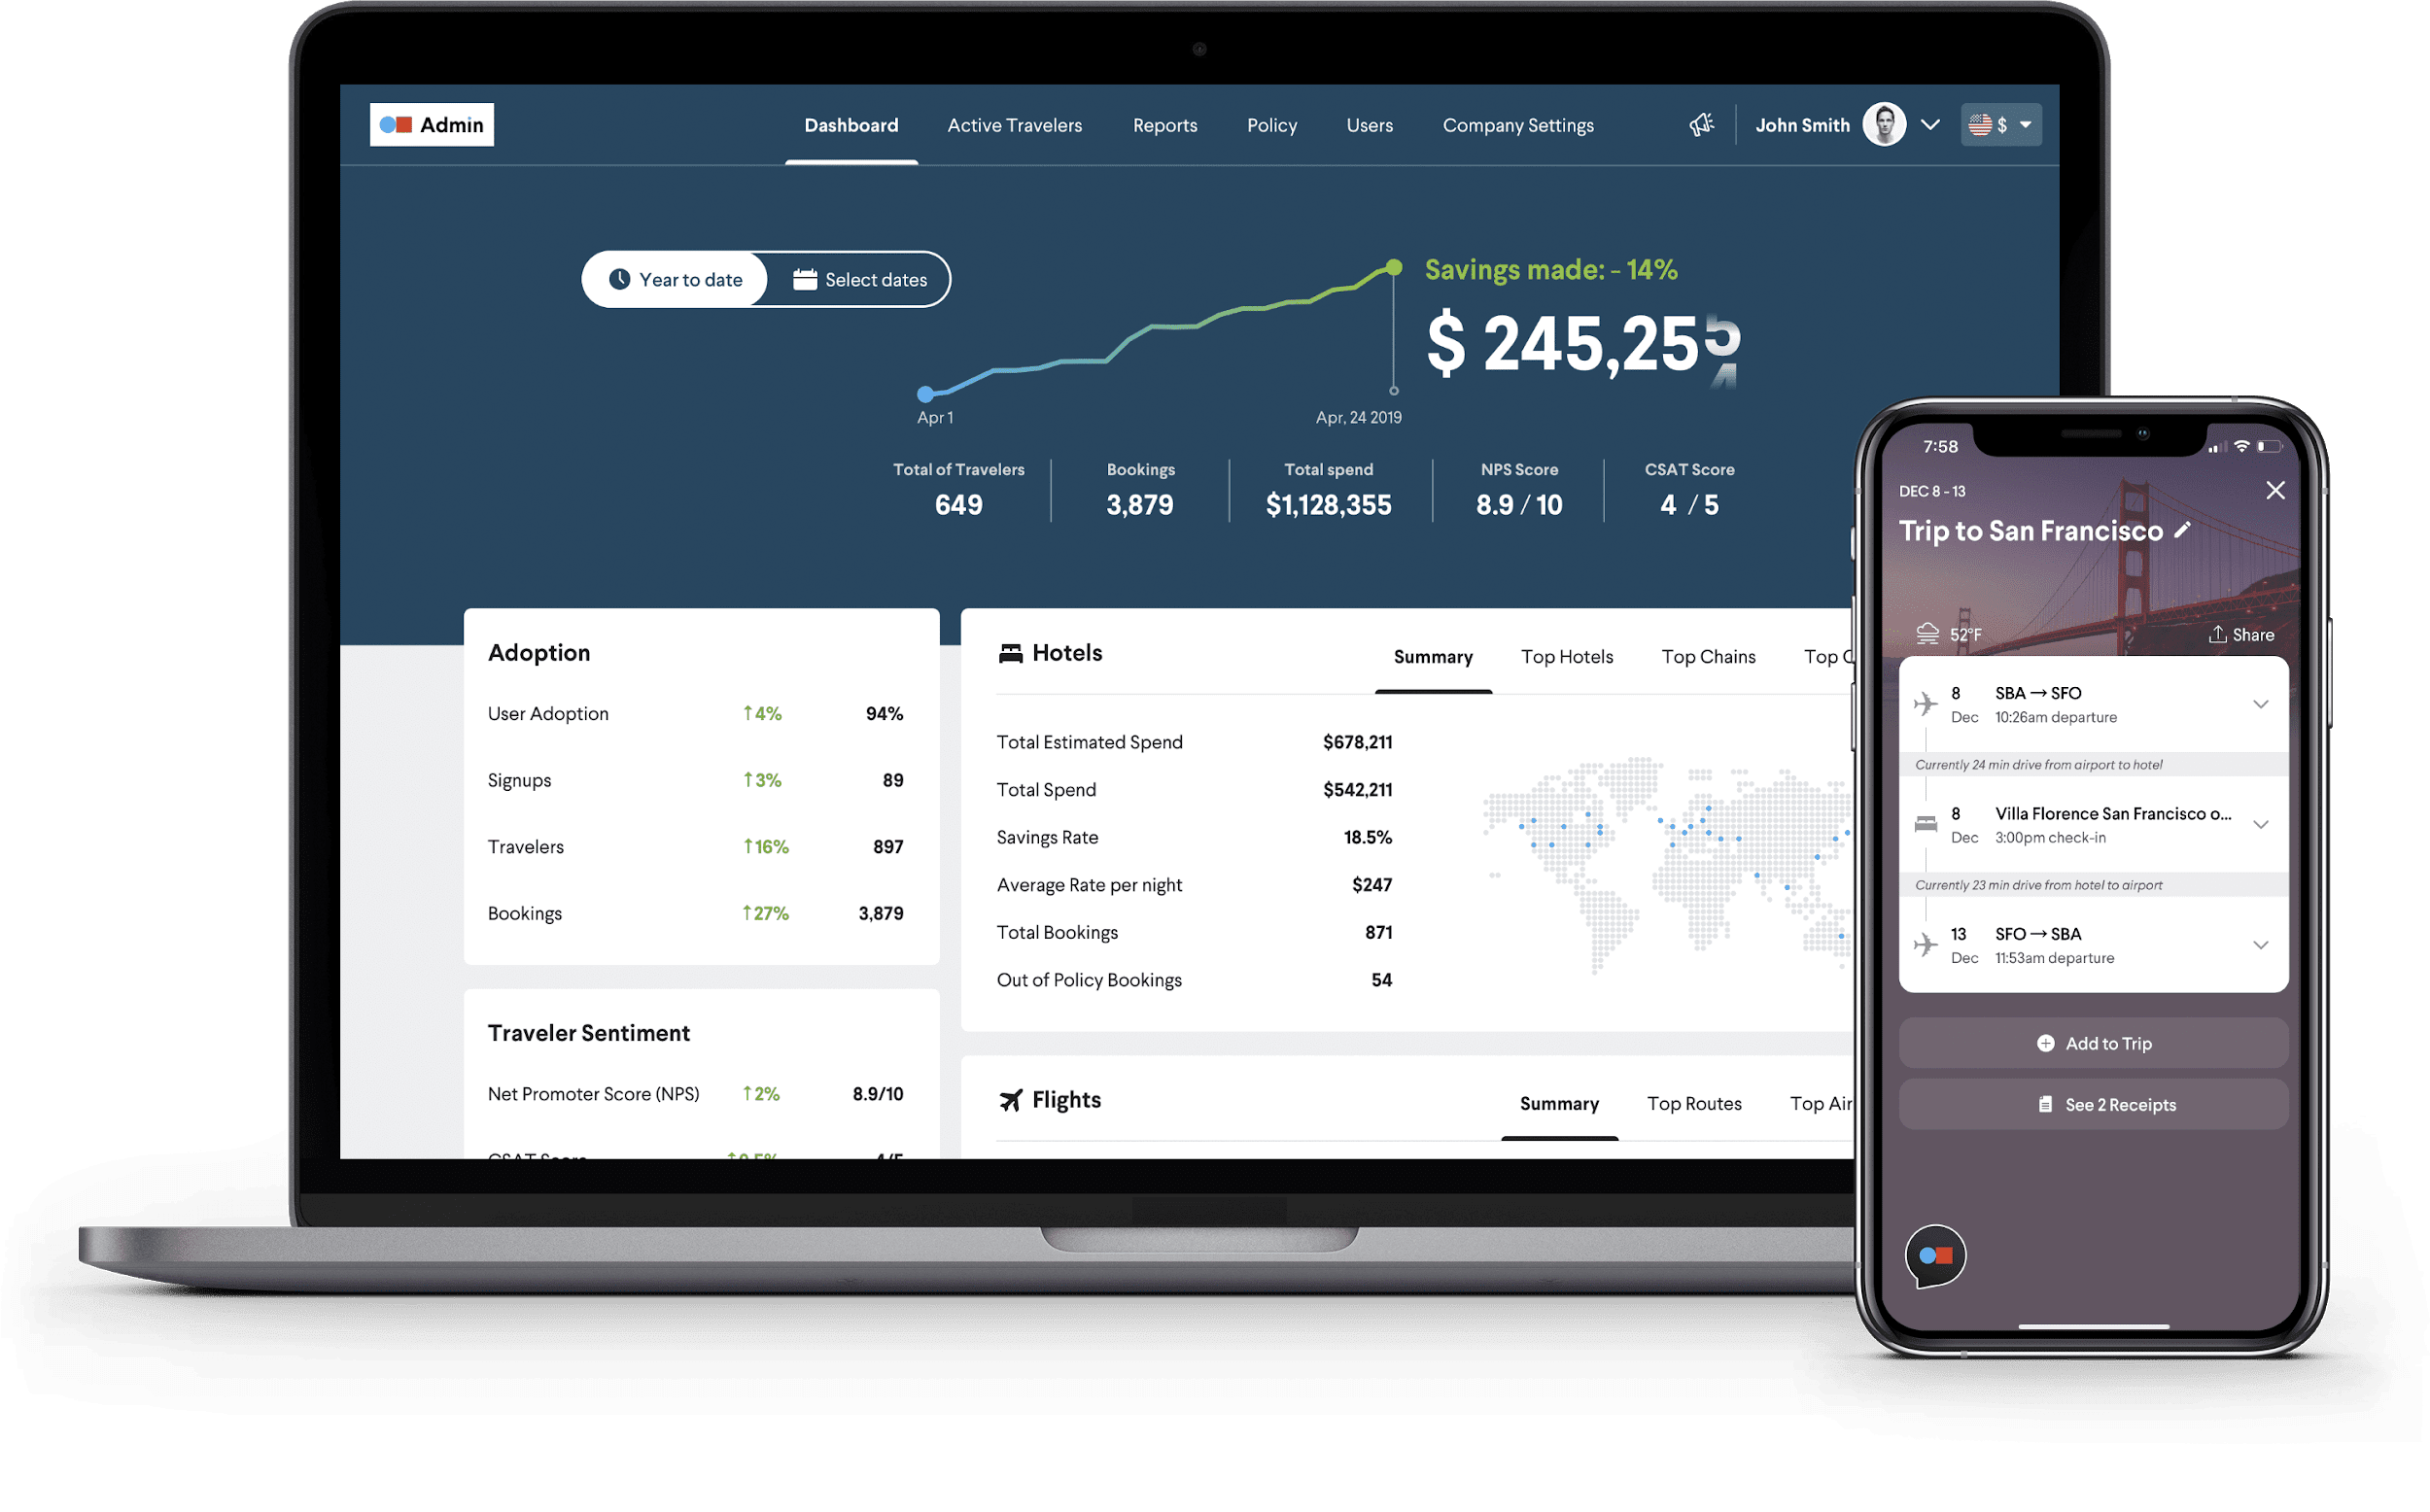 Admin dashboard and travel mobile app interfaces